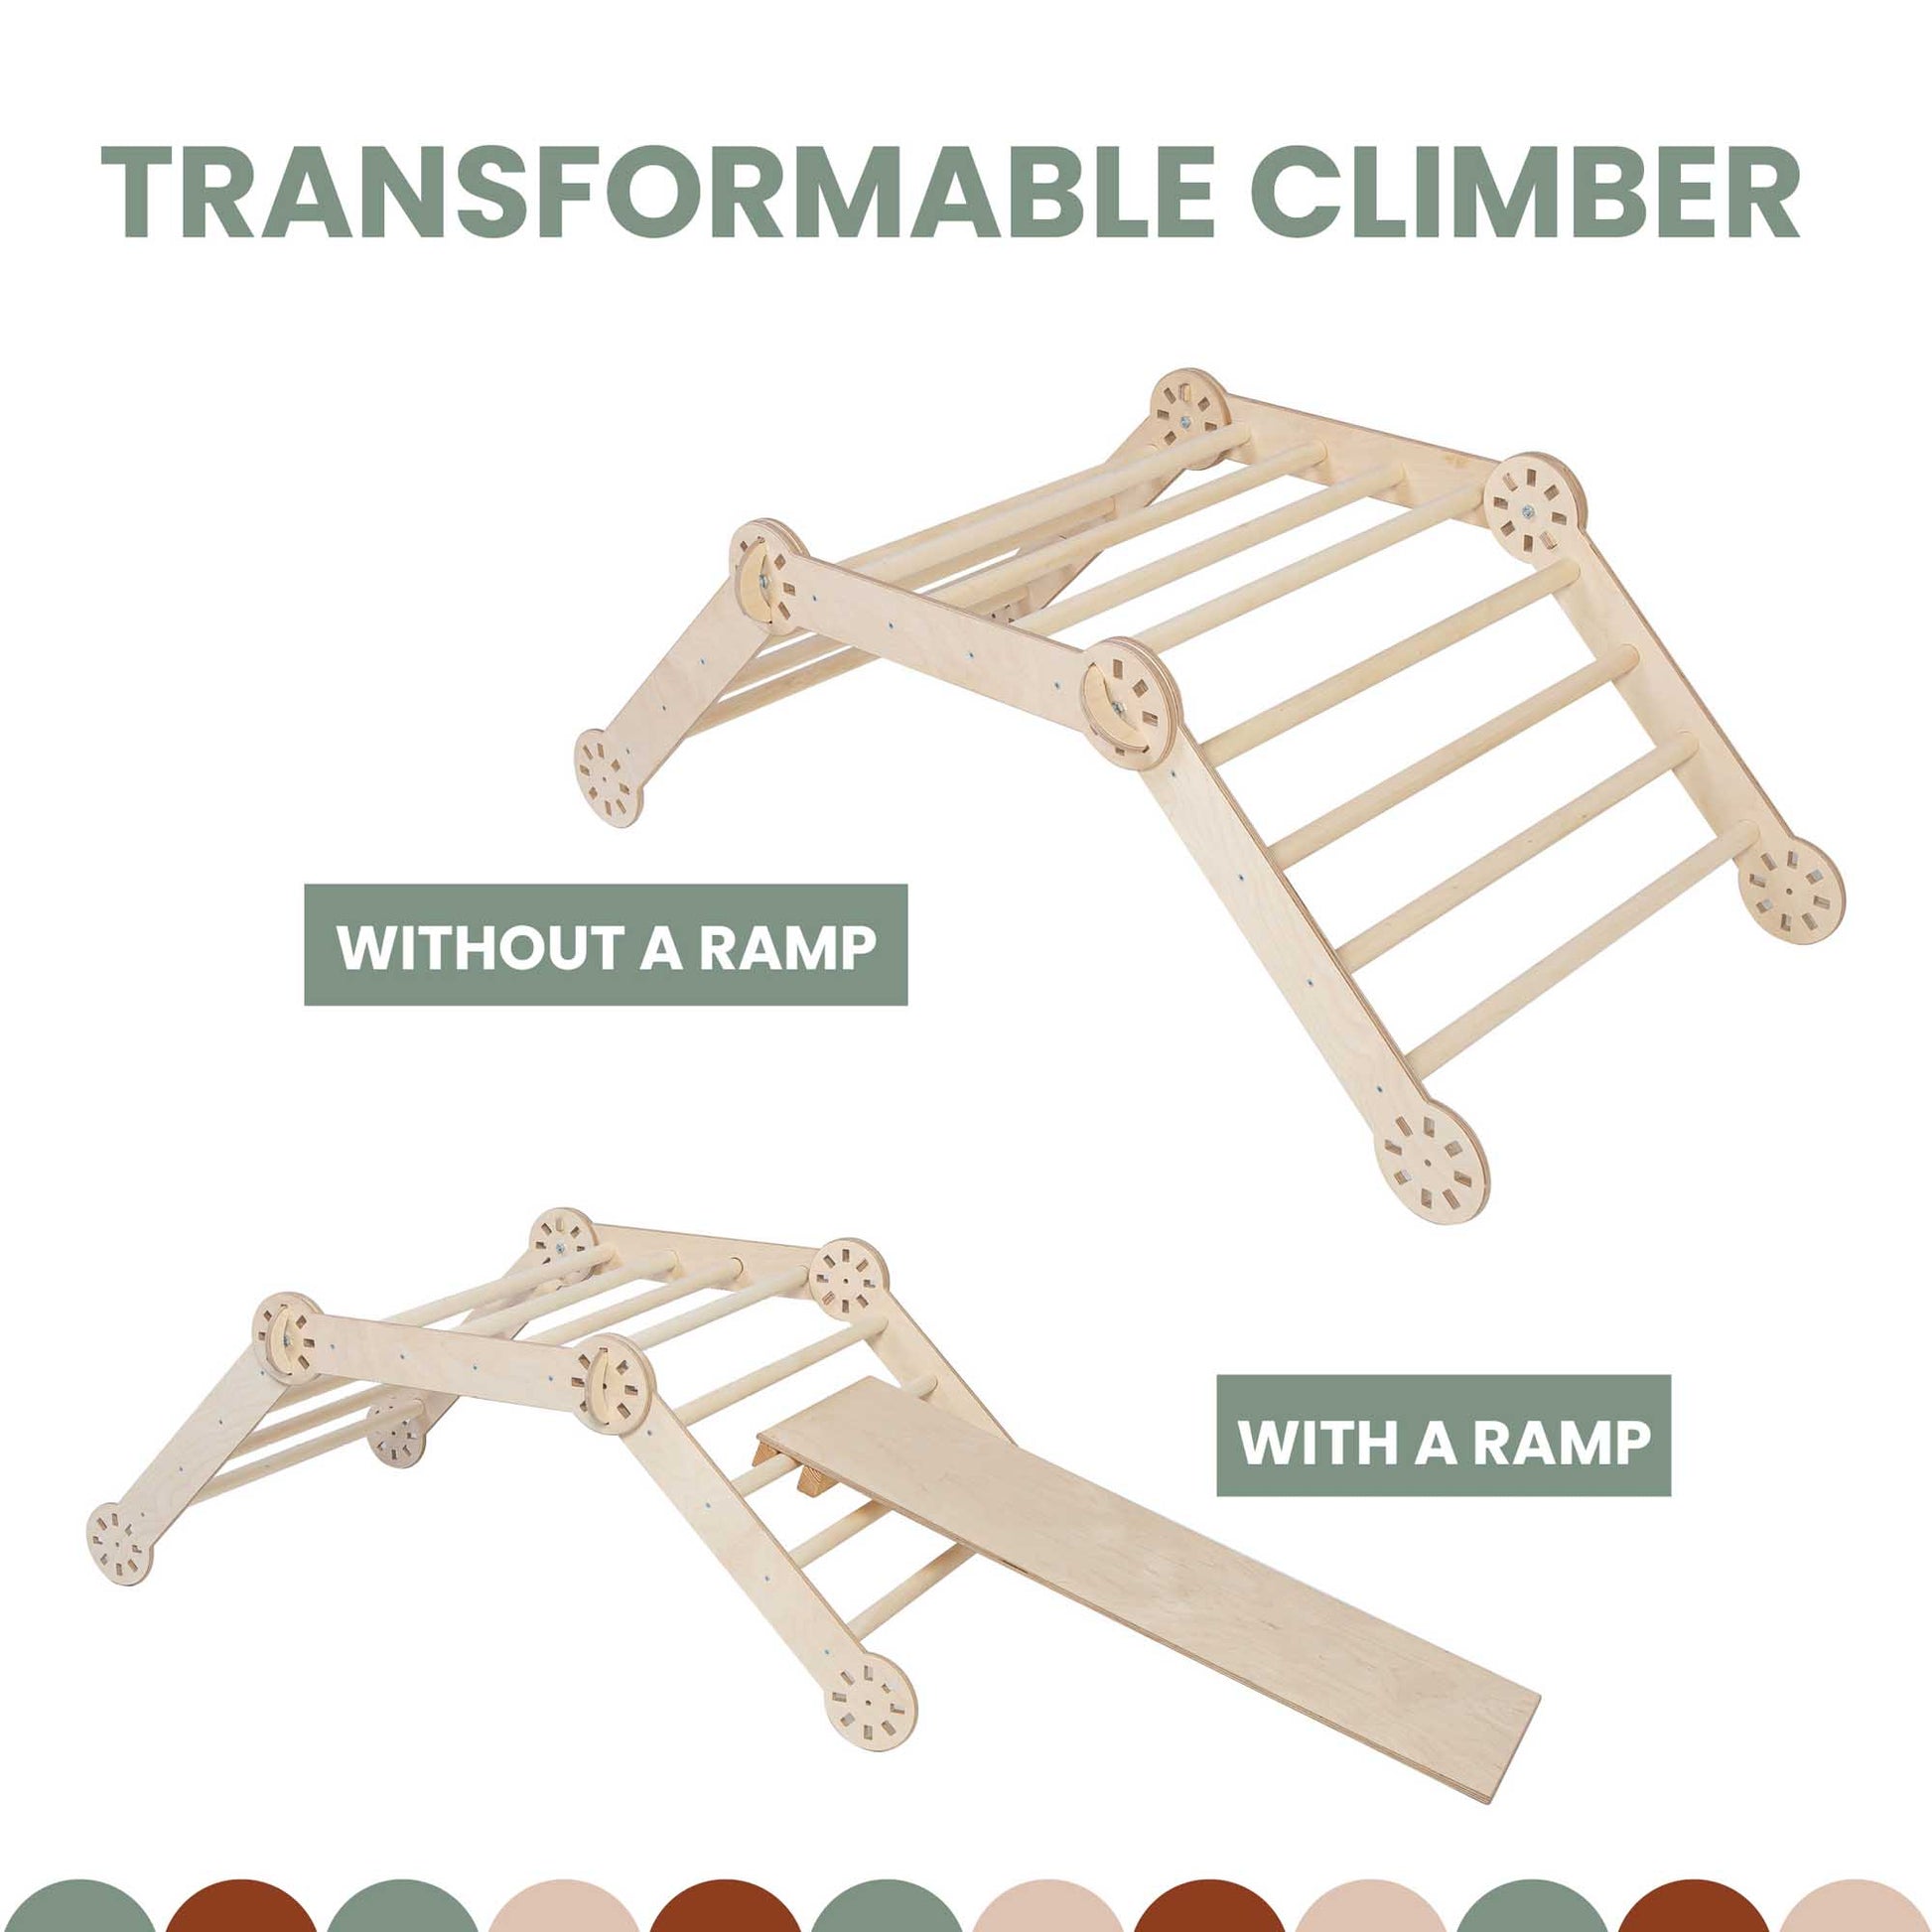 Transformable climbing gym - without a ramp with a climbing arch.